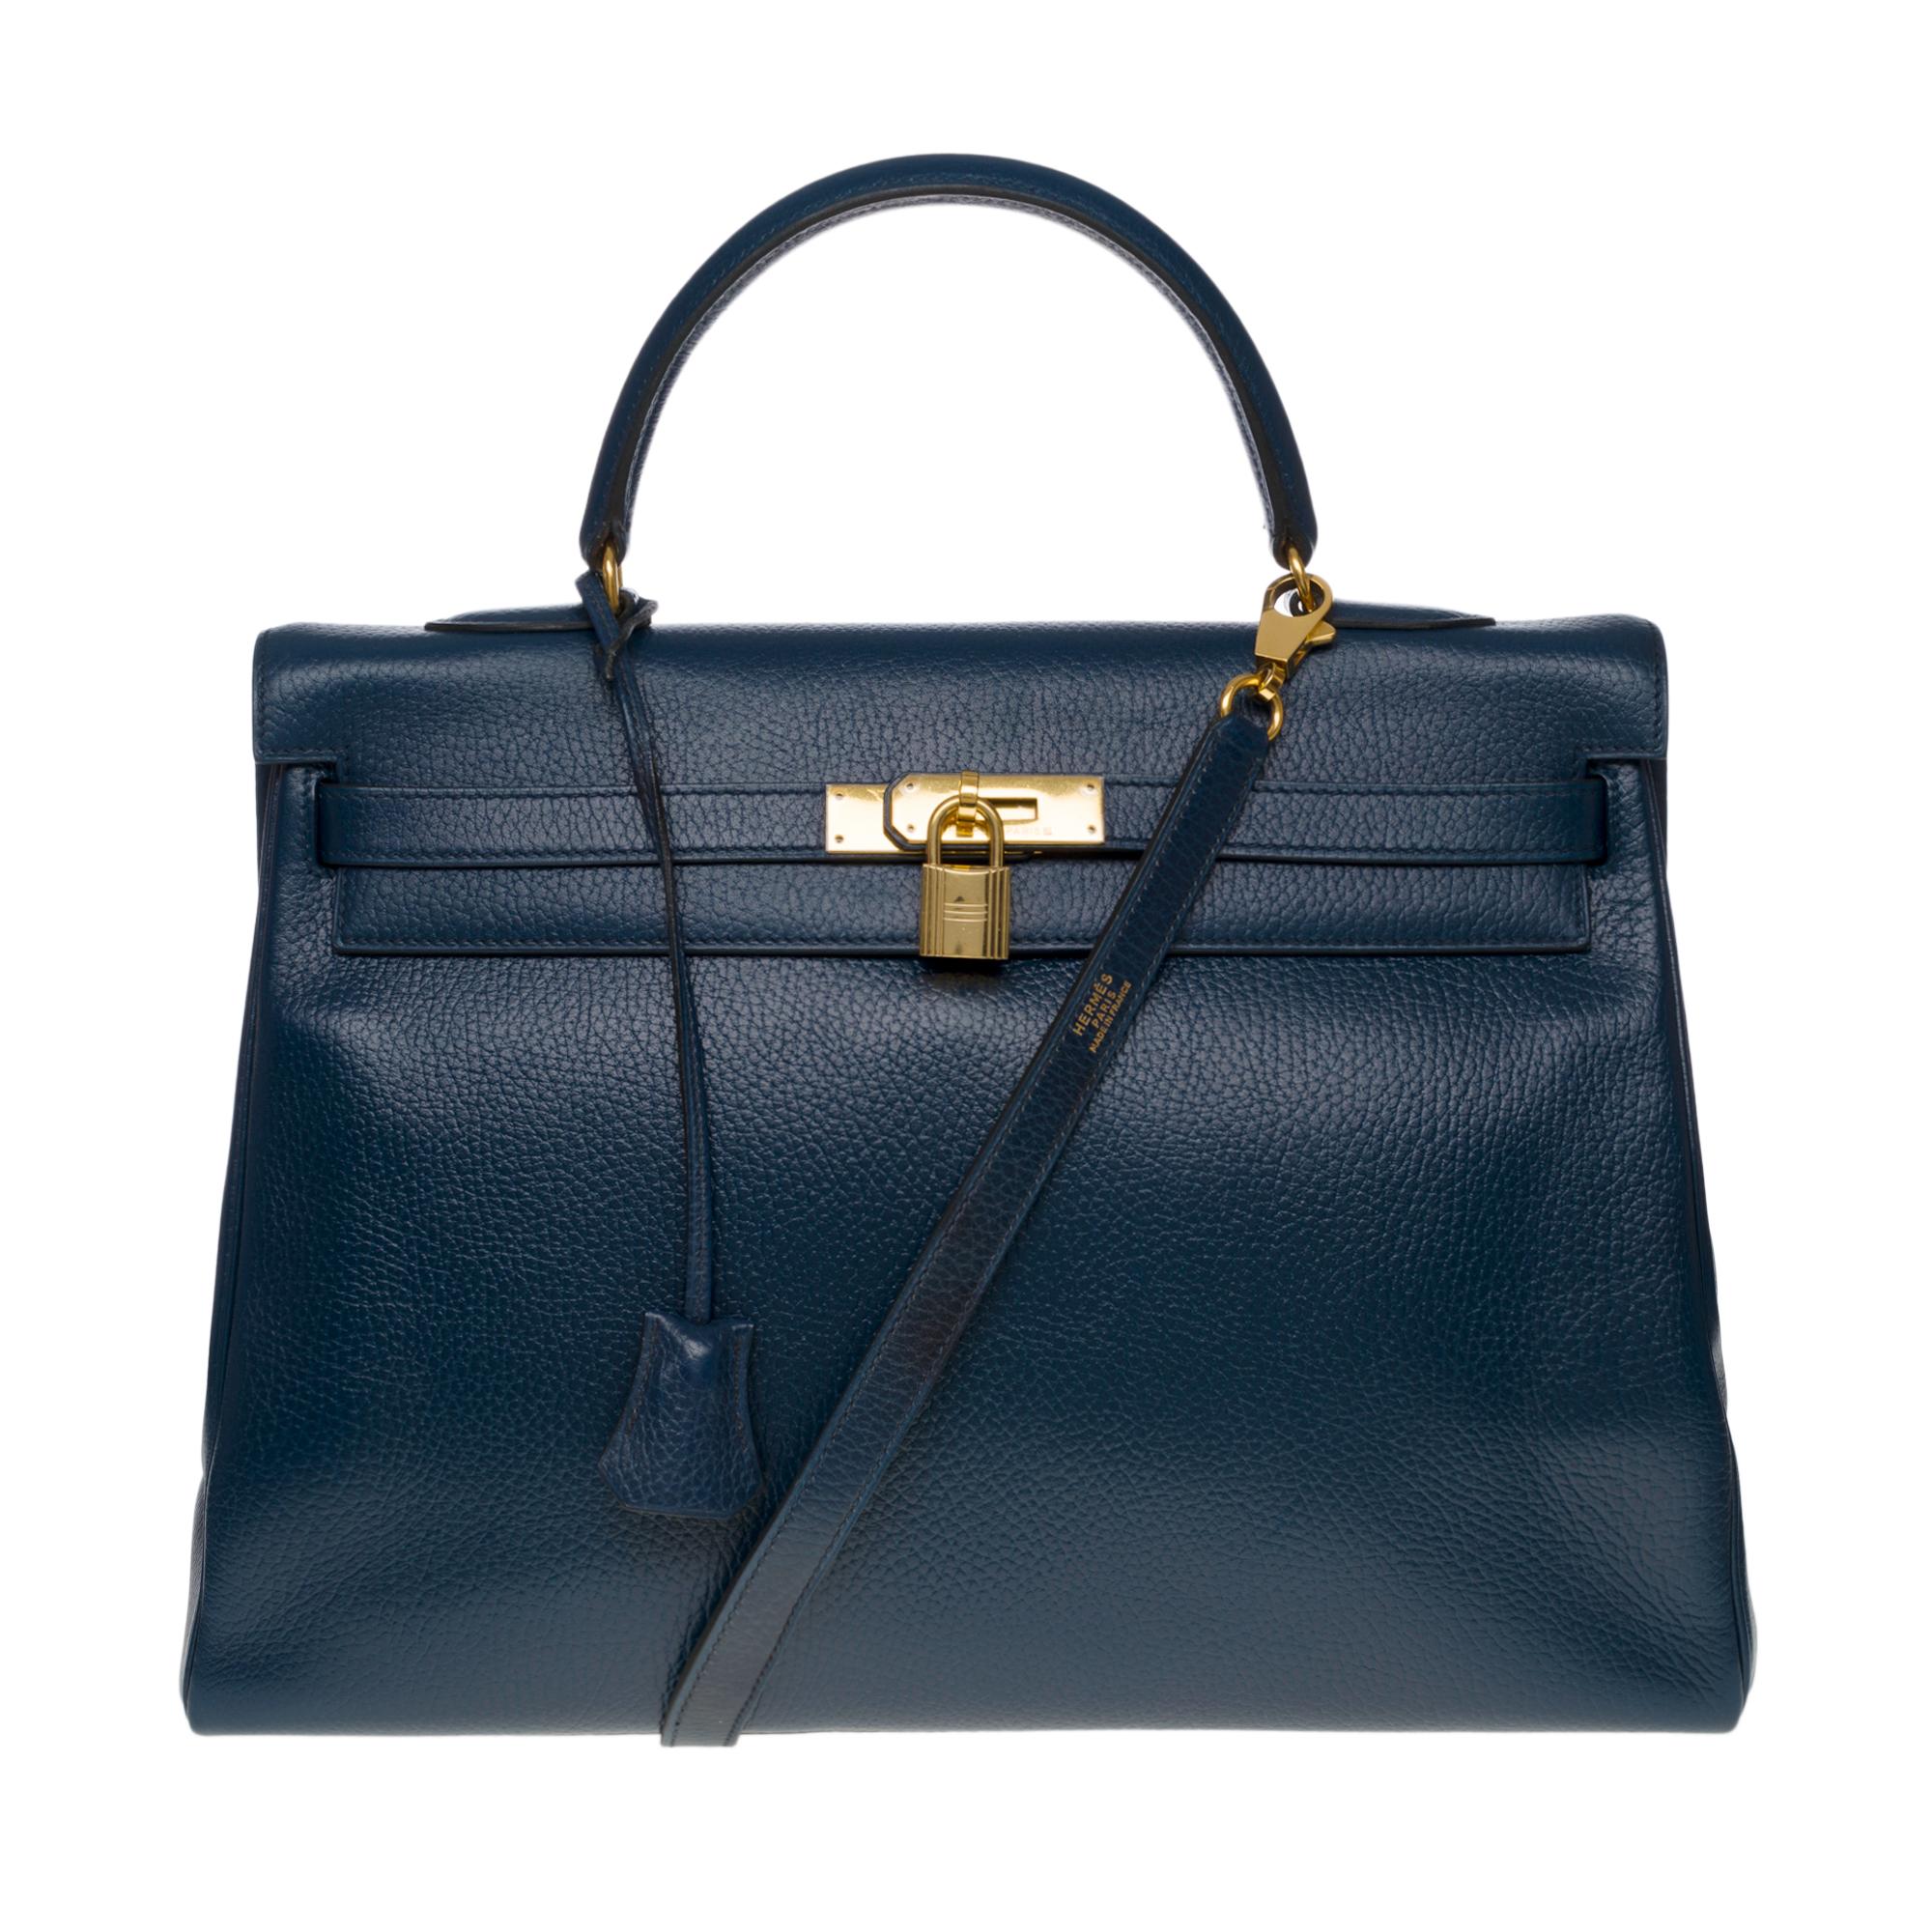 Exquisite Hermes Kelly 35 retourne handbag strap in Blue indigo Vache Ardenne leather, gold plated metal hardware, blue leather handle, removable shoulder strap in blue leather allowing a hand or shoulder support

Flap closure
Inner lining in blue